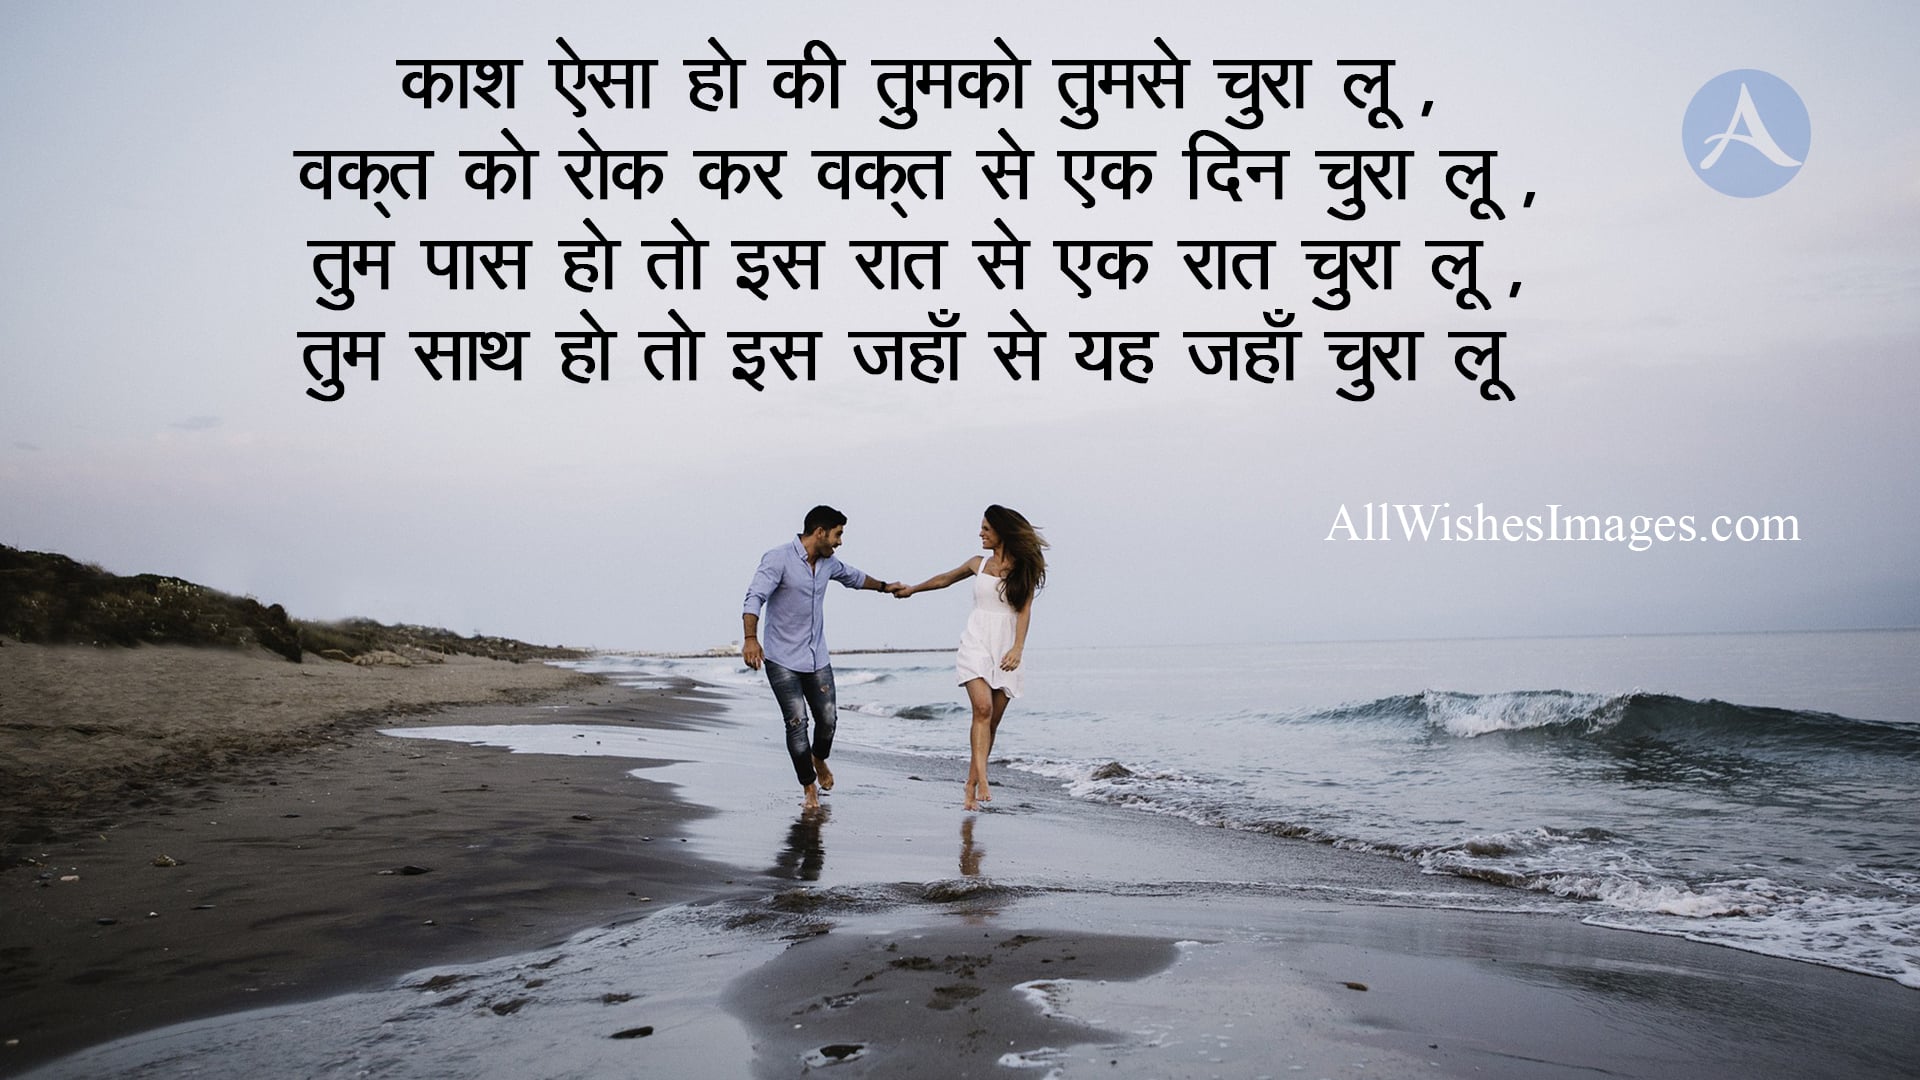 Love Shayari In Hindi For Girlfriend With Images Hd Download - All Wishes  Images - Images for WhatsApp